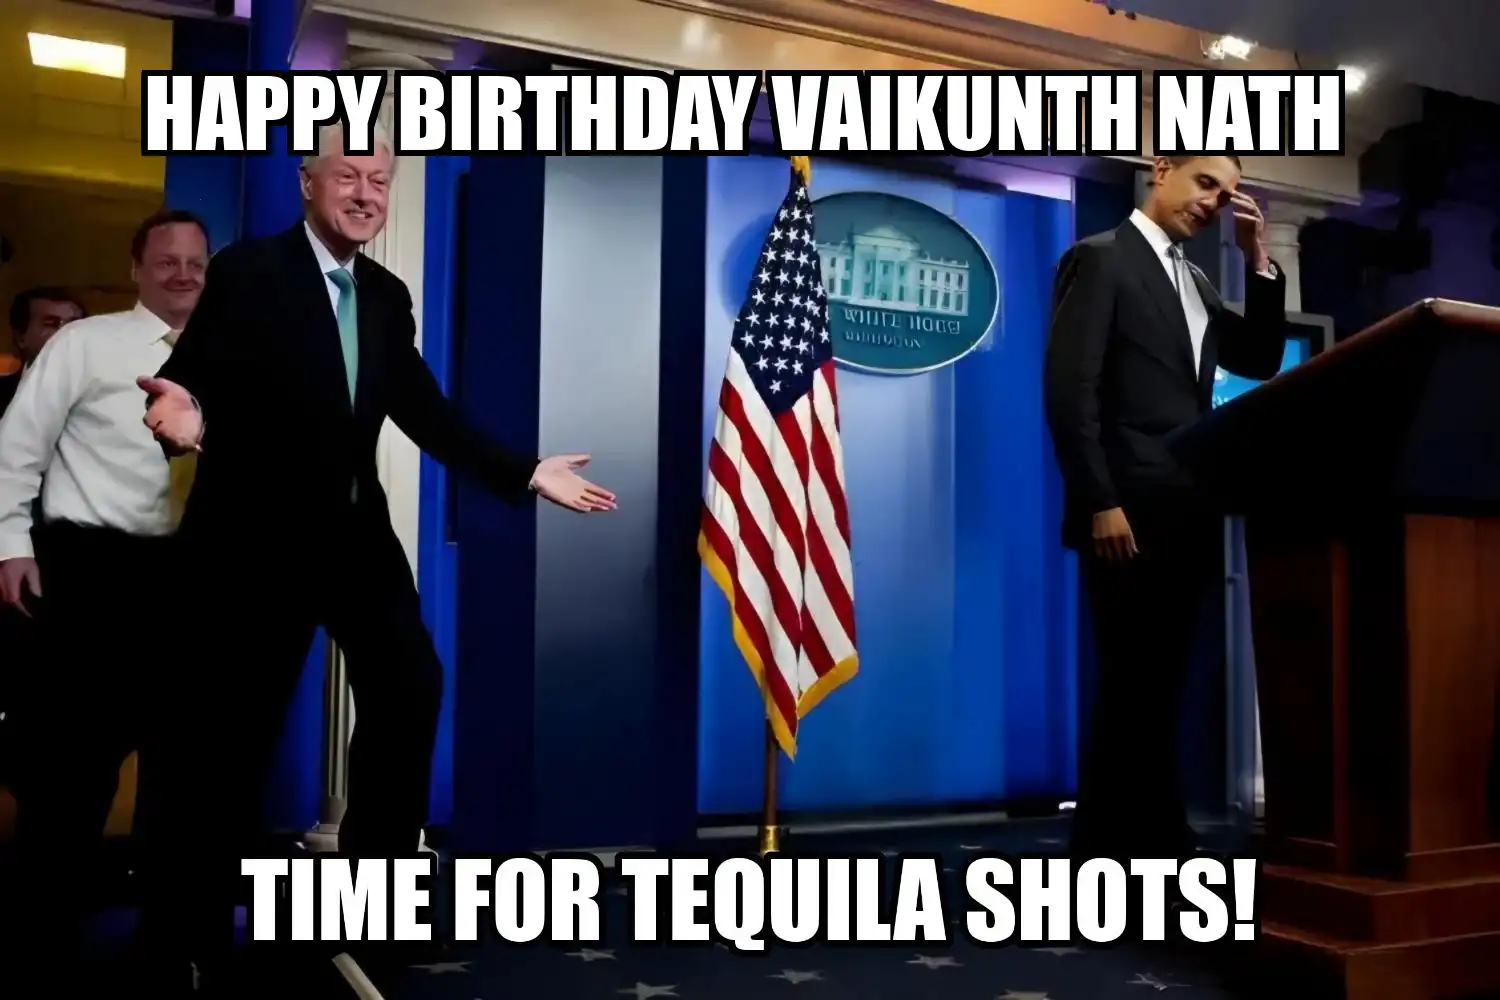 Happy Birthday Vaikunth Nath Time For Tequila Shots Memes